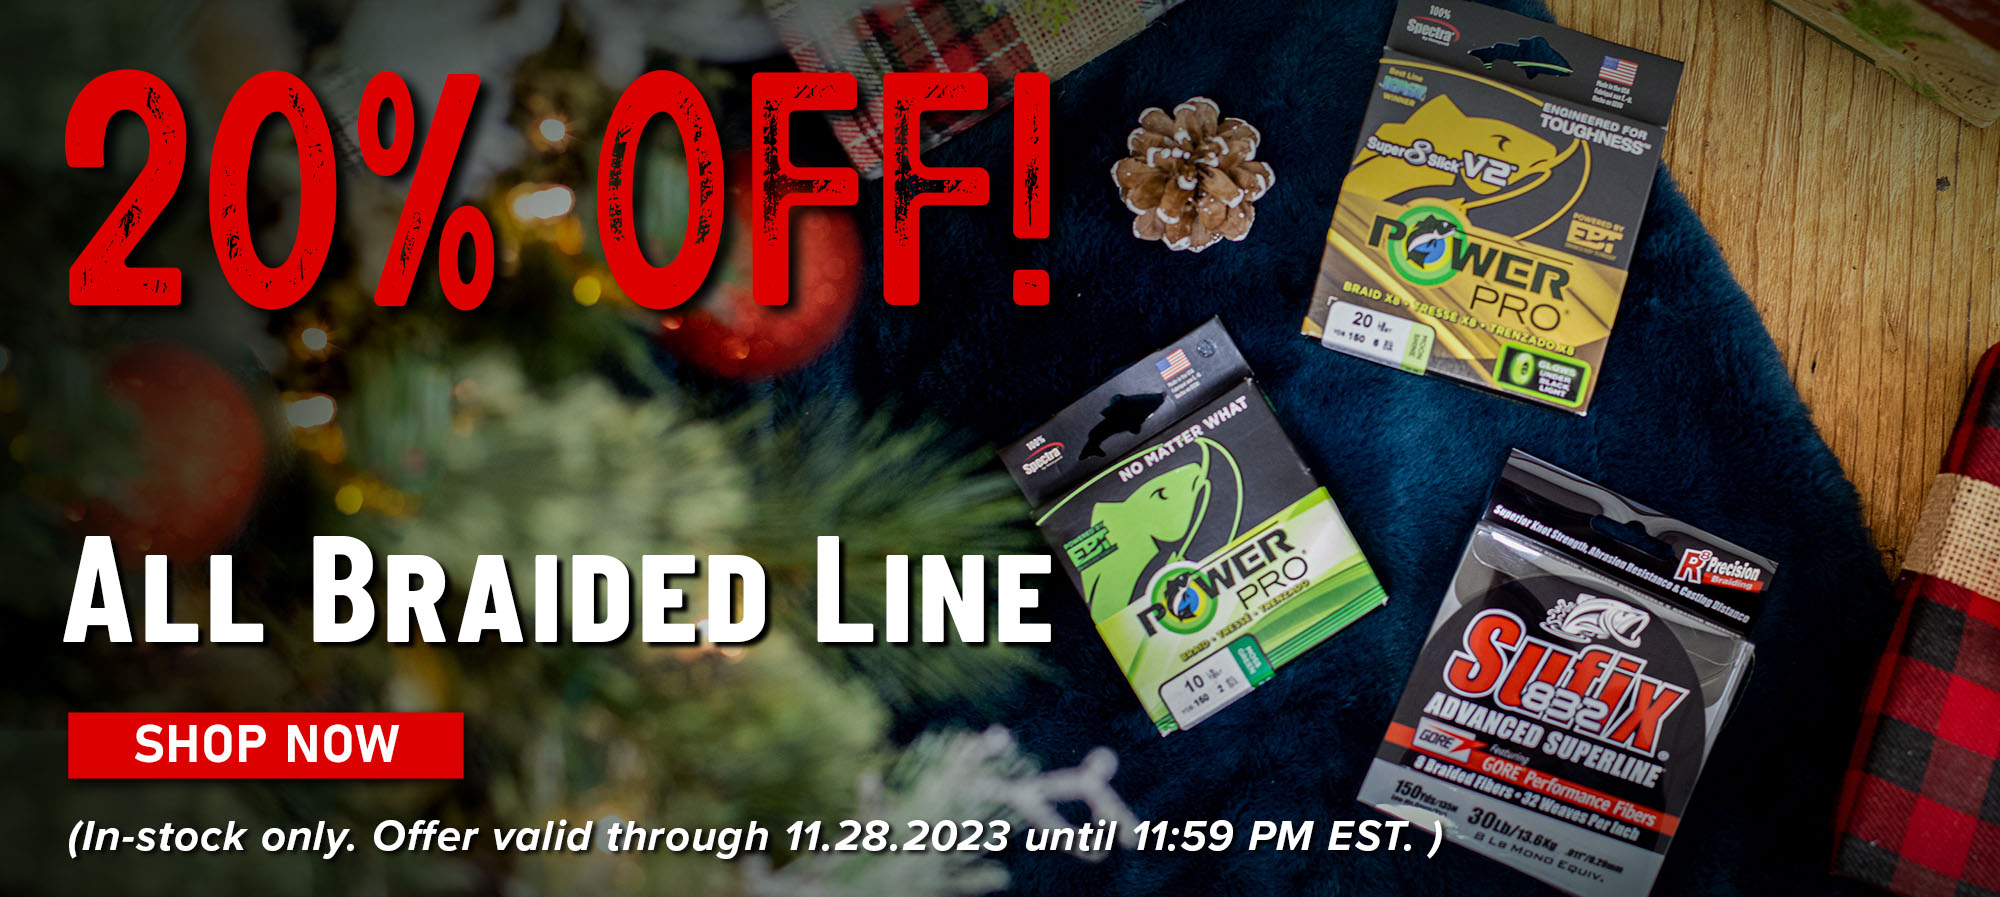 20% Off! All Braided Line Shop Now (In-stock only. Offer valid through 11.28.2023 until 11:59 PM EST.)